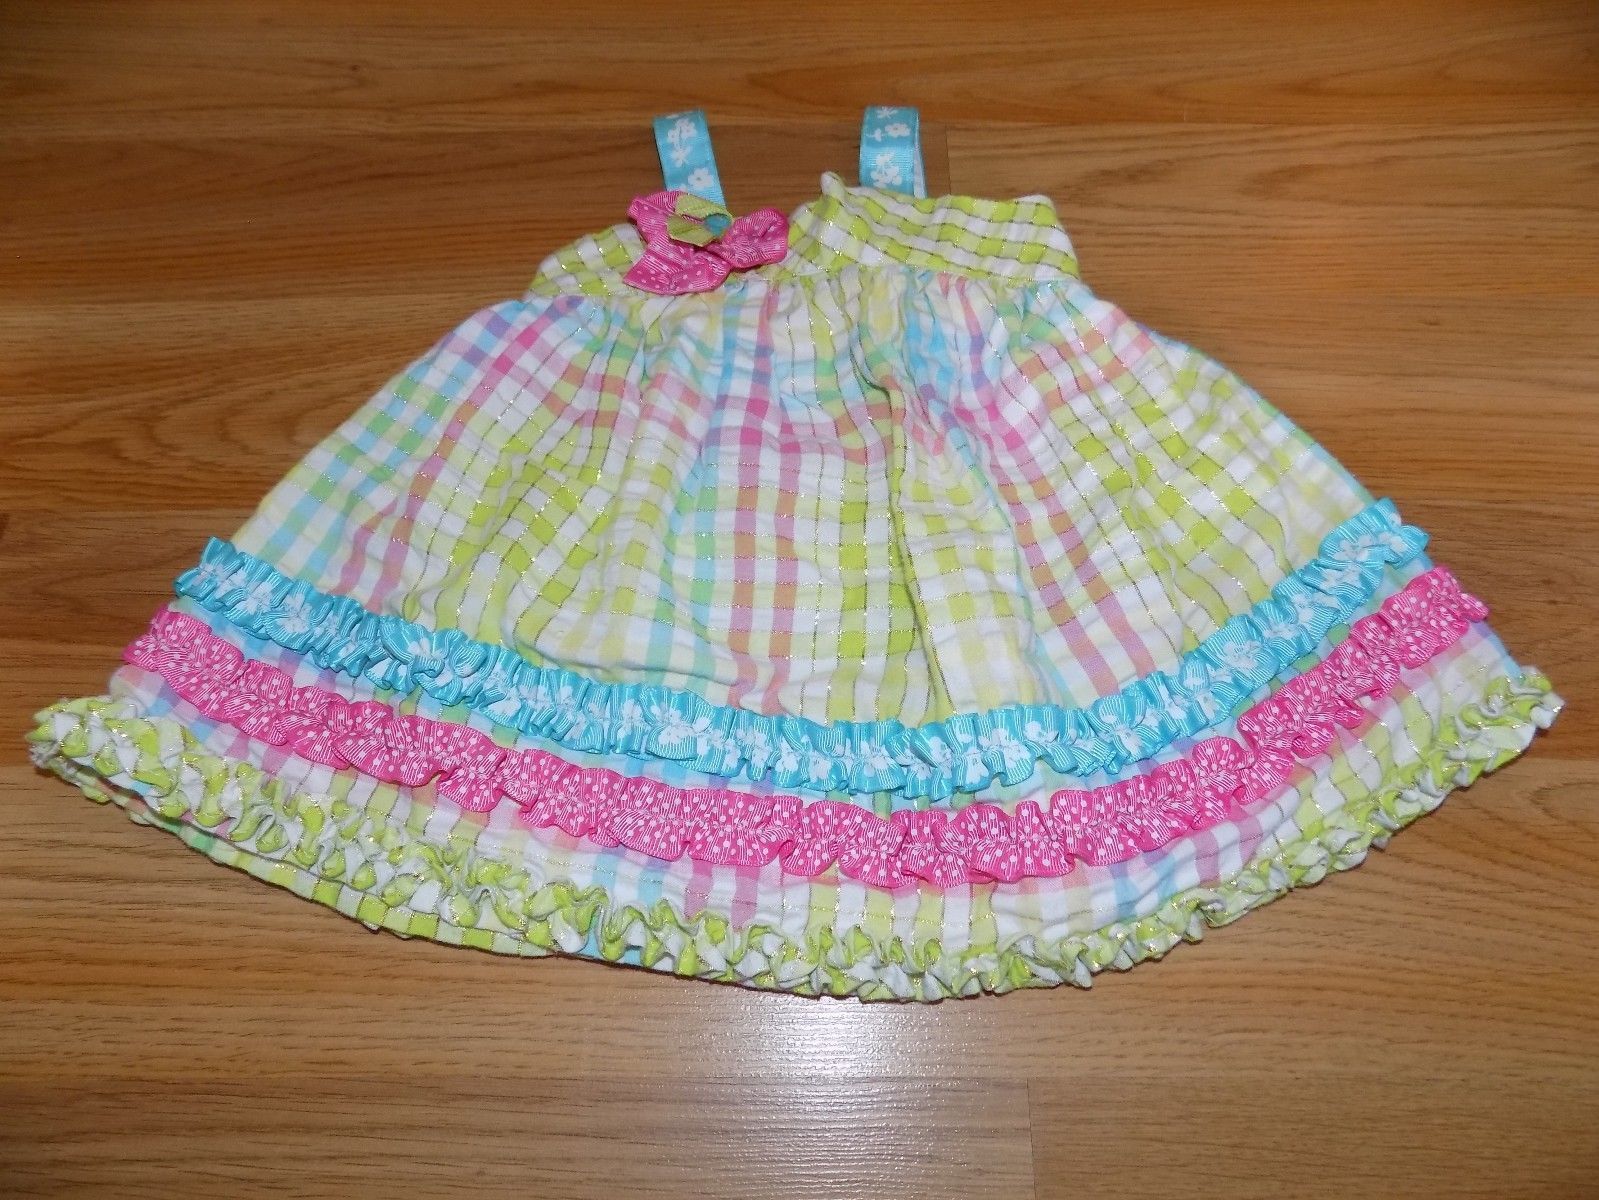 Infant Size 3-6 Months Bonnie Baby Gingham Checked Sundress Sun Dress Lime Pink  - $14.00